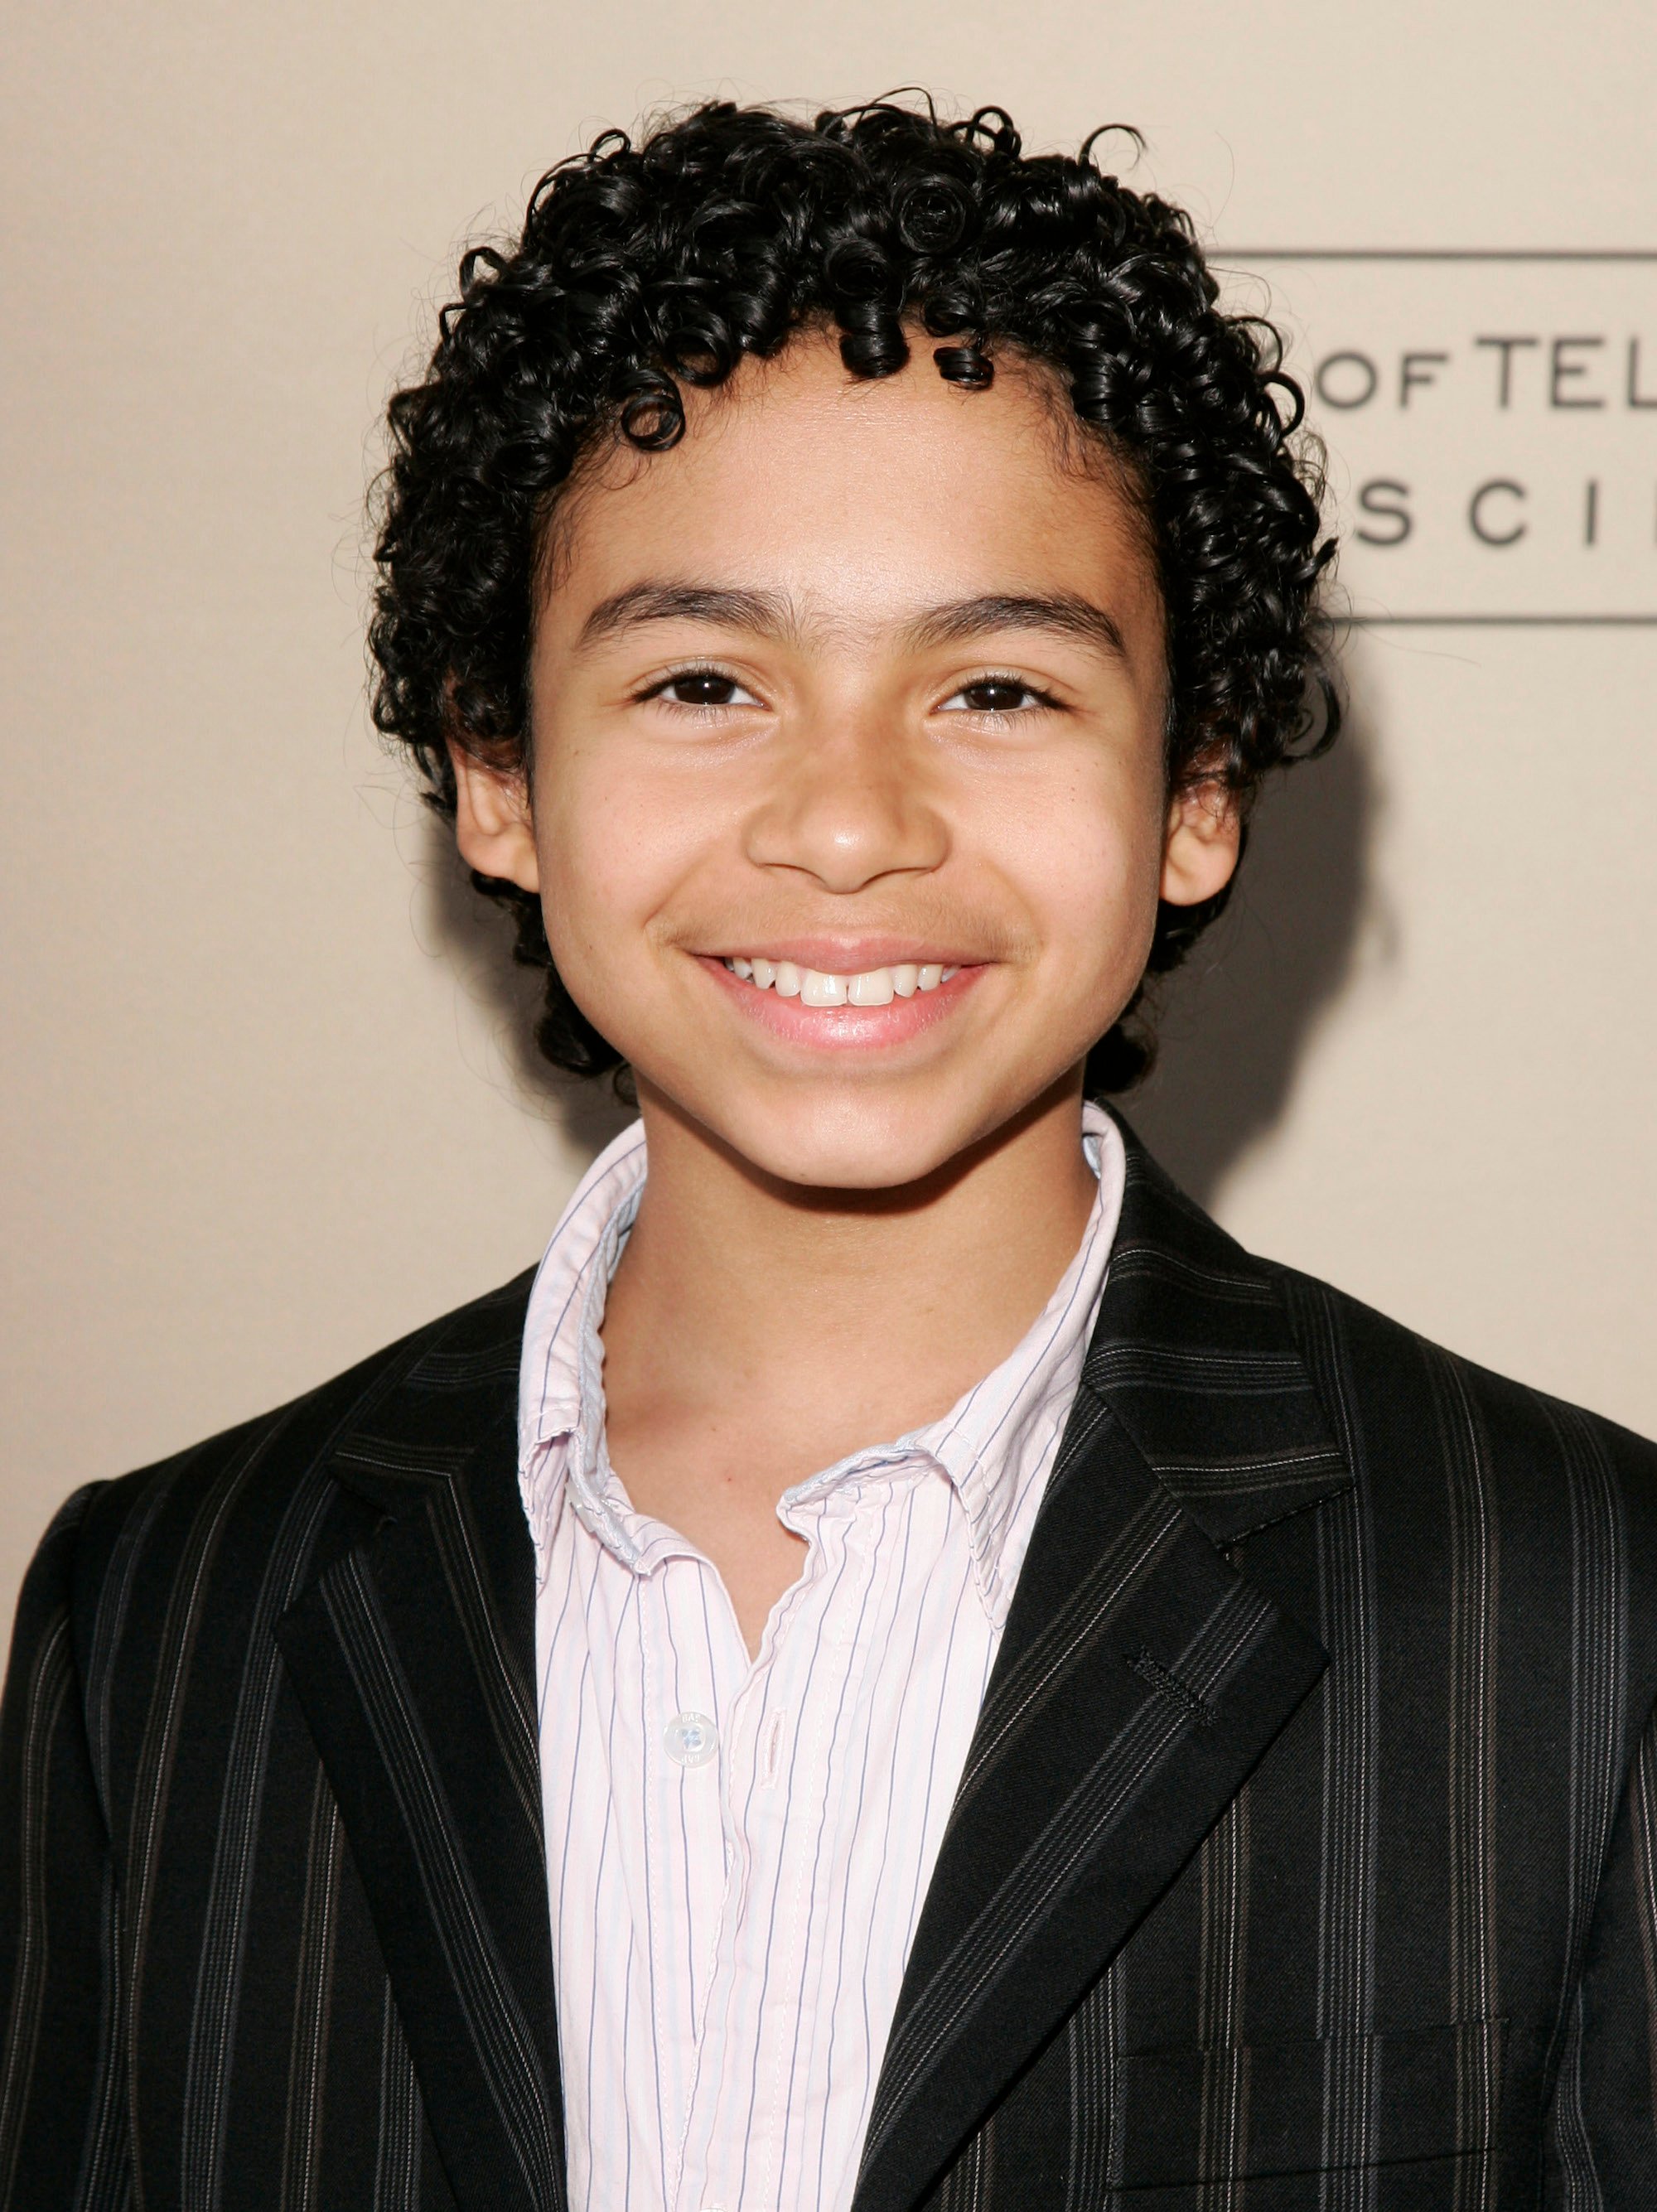 Noah Gray-Cabey wearing a black suit jacket to the 'Heroes' red carpet event.